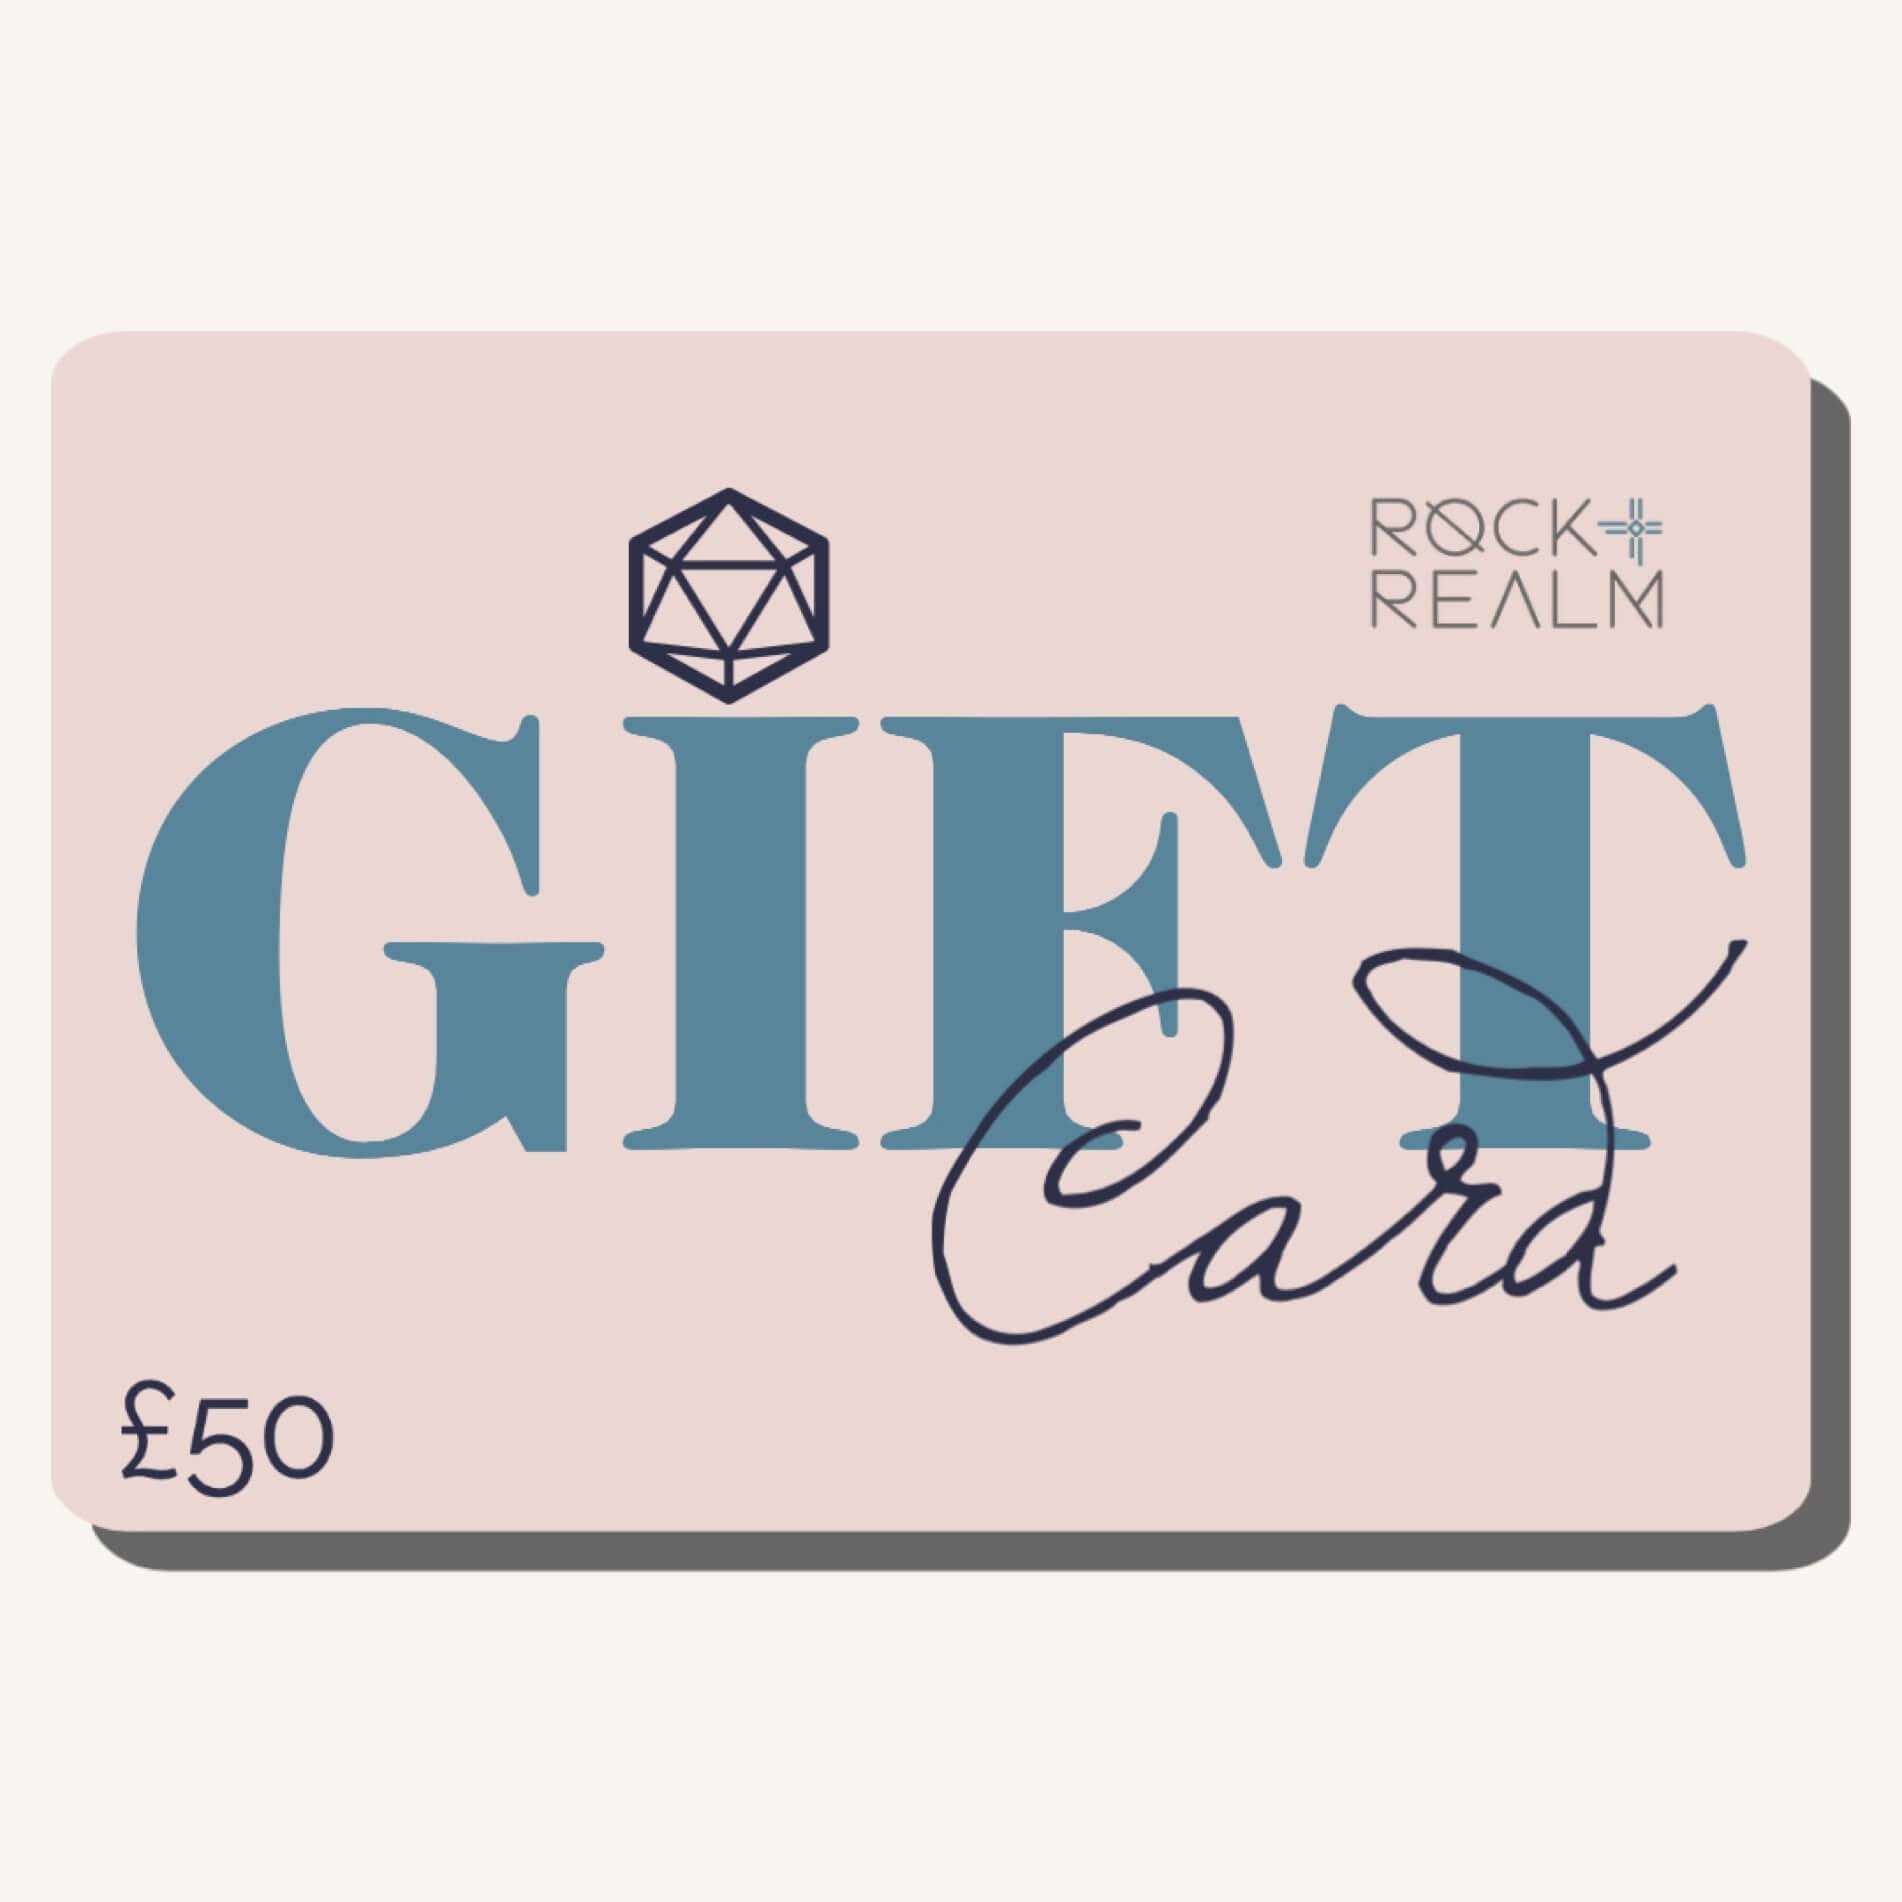 rock and realm £50 gift card picture in pink and blue